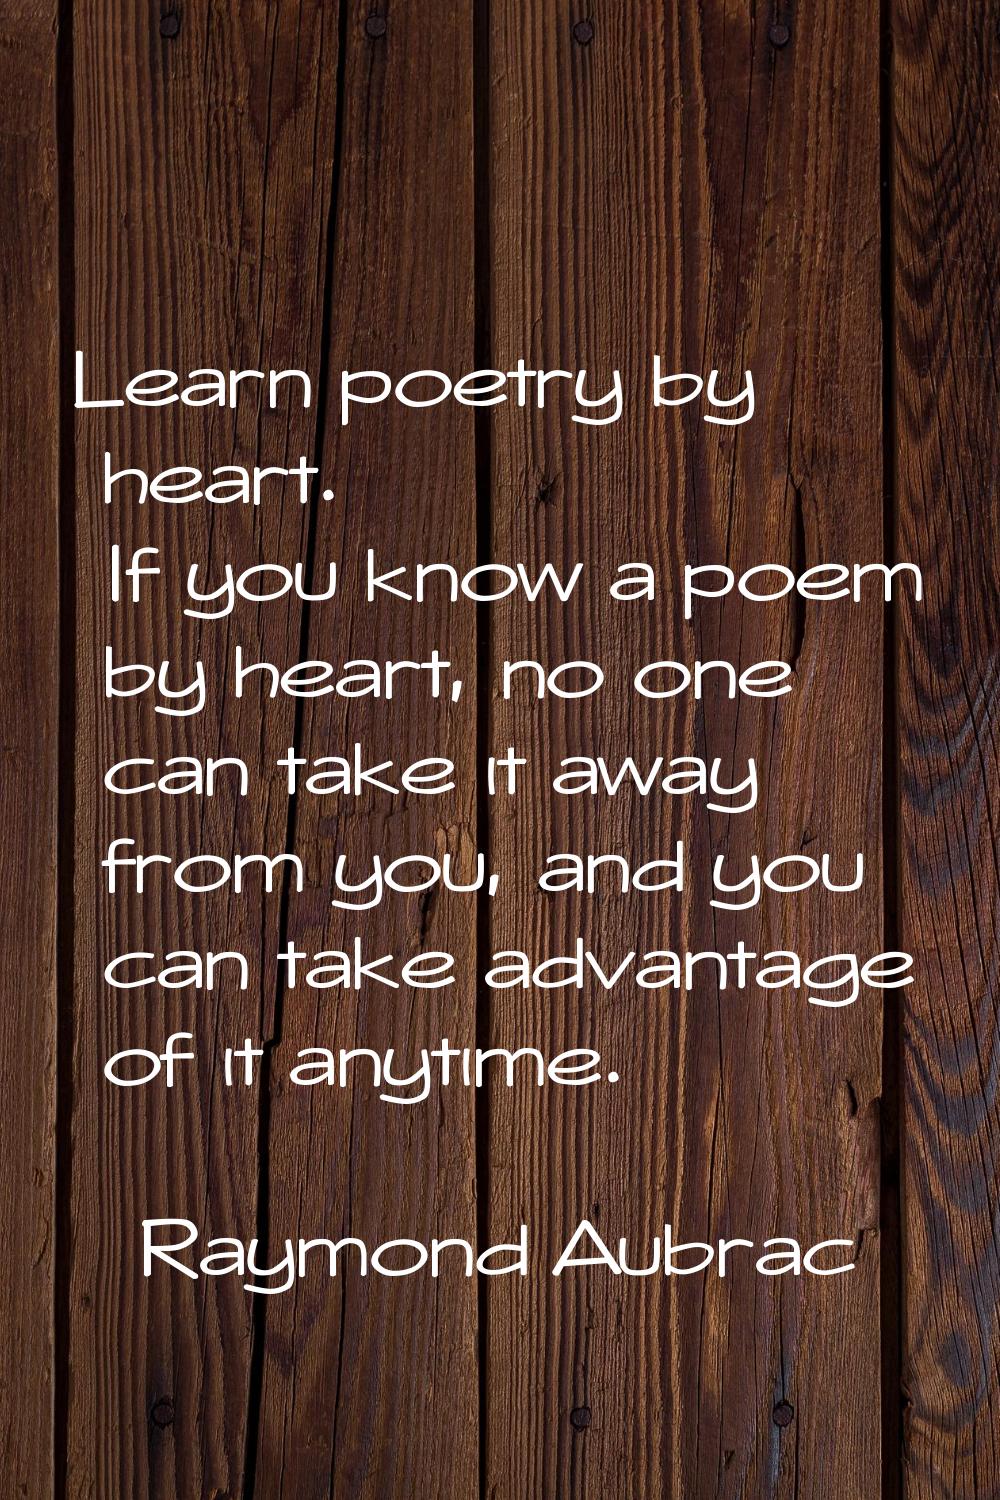 Learn poetry by heart. If you know a poem by heart, no one can take it away from you, and you can t